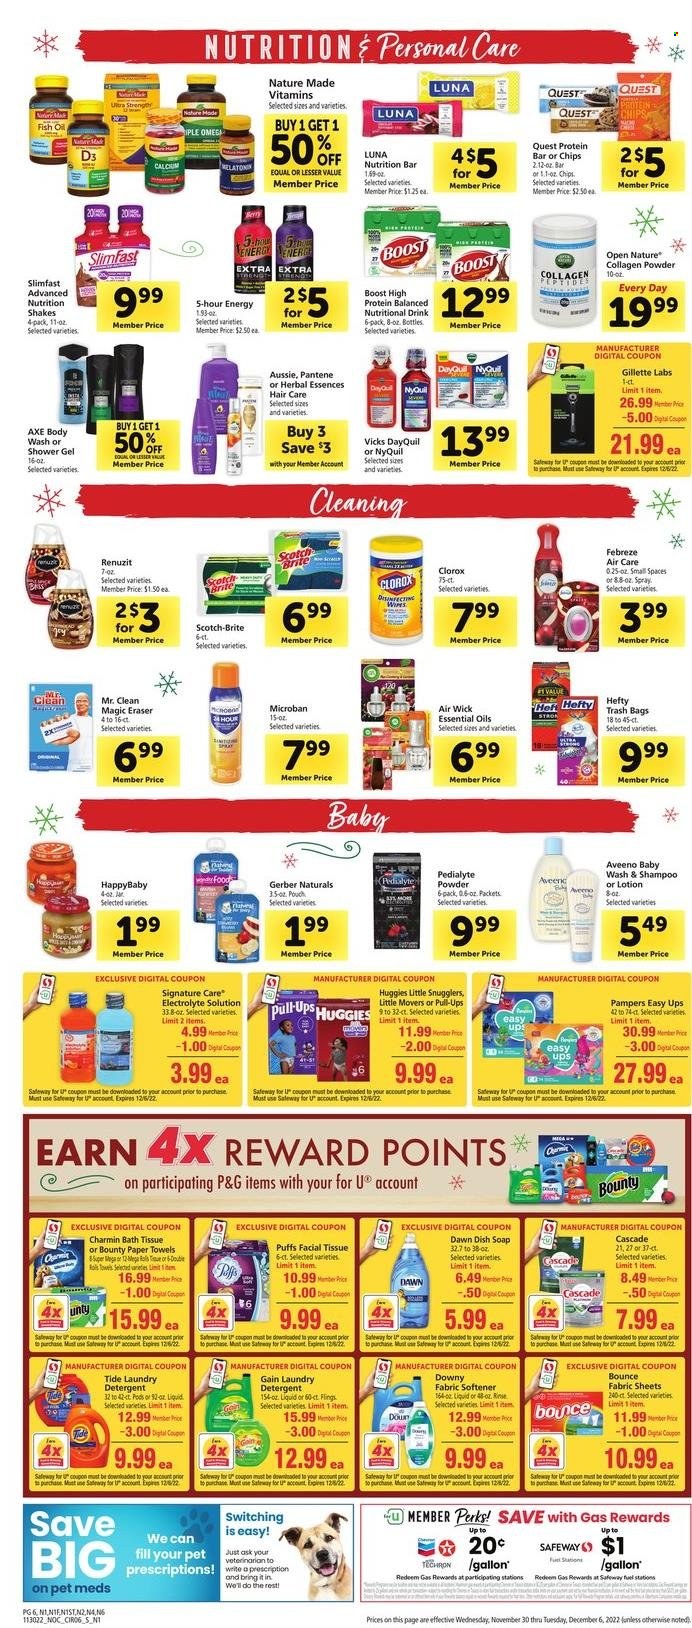 thumbnail - Safeway Flyer - 11/30/2022 - 12/06/2022 - Sales products - puffs, Slimfast, shake, Bounty, Gerber, chips, protein bar, oil, Boost, bath tissue, Scott, kitchen towels, paper towels, Charmin, detergent, Febreze, Gain, Clorox, Cascade, Tide, fabric softener, laundry detergent, Bounce, Downy Laundry, Joy, body wash, shampoo, shower gel, soap, Aveeno, Aussie, Pantene, Herbal Essences, body lotion, Gillette, Axe, Hefty, trash bags, eraser, Renuzit, Air Wick, essential oils, calcium, DayQuil, fish oil, Melatonin, Nature Made, NyQuil, Vicks, vitamin D3, Huggies. Page 6.